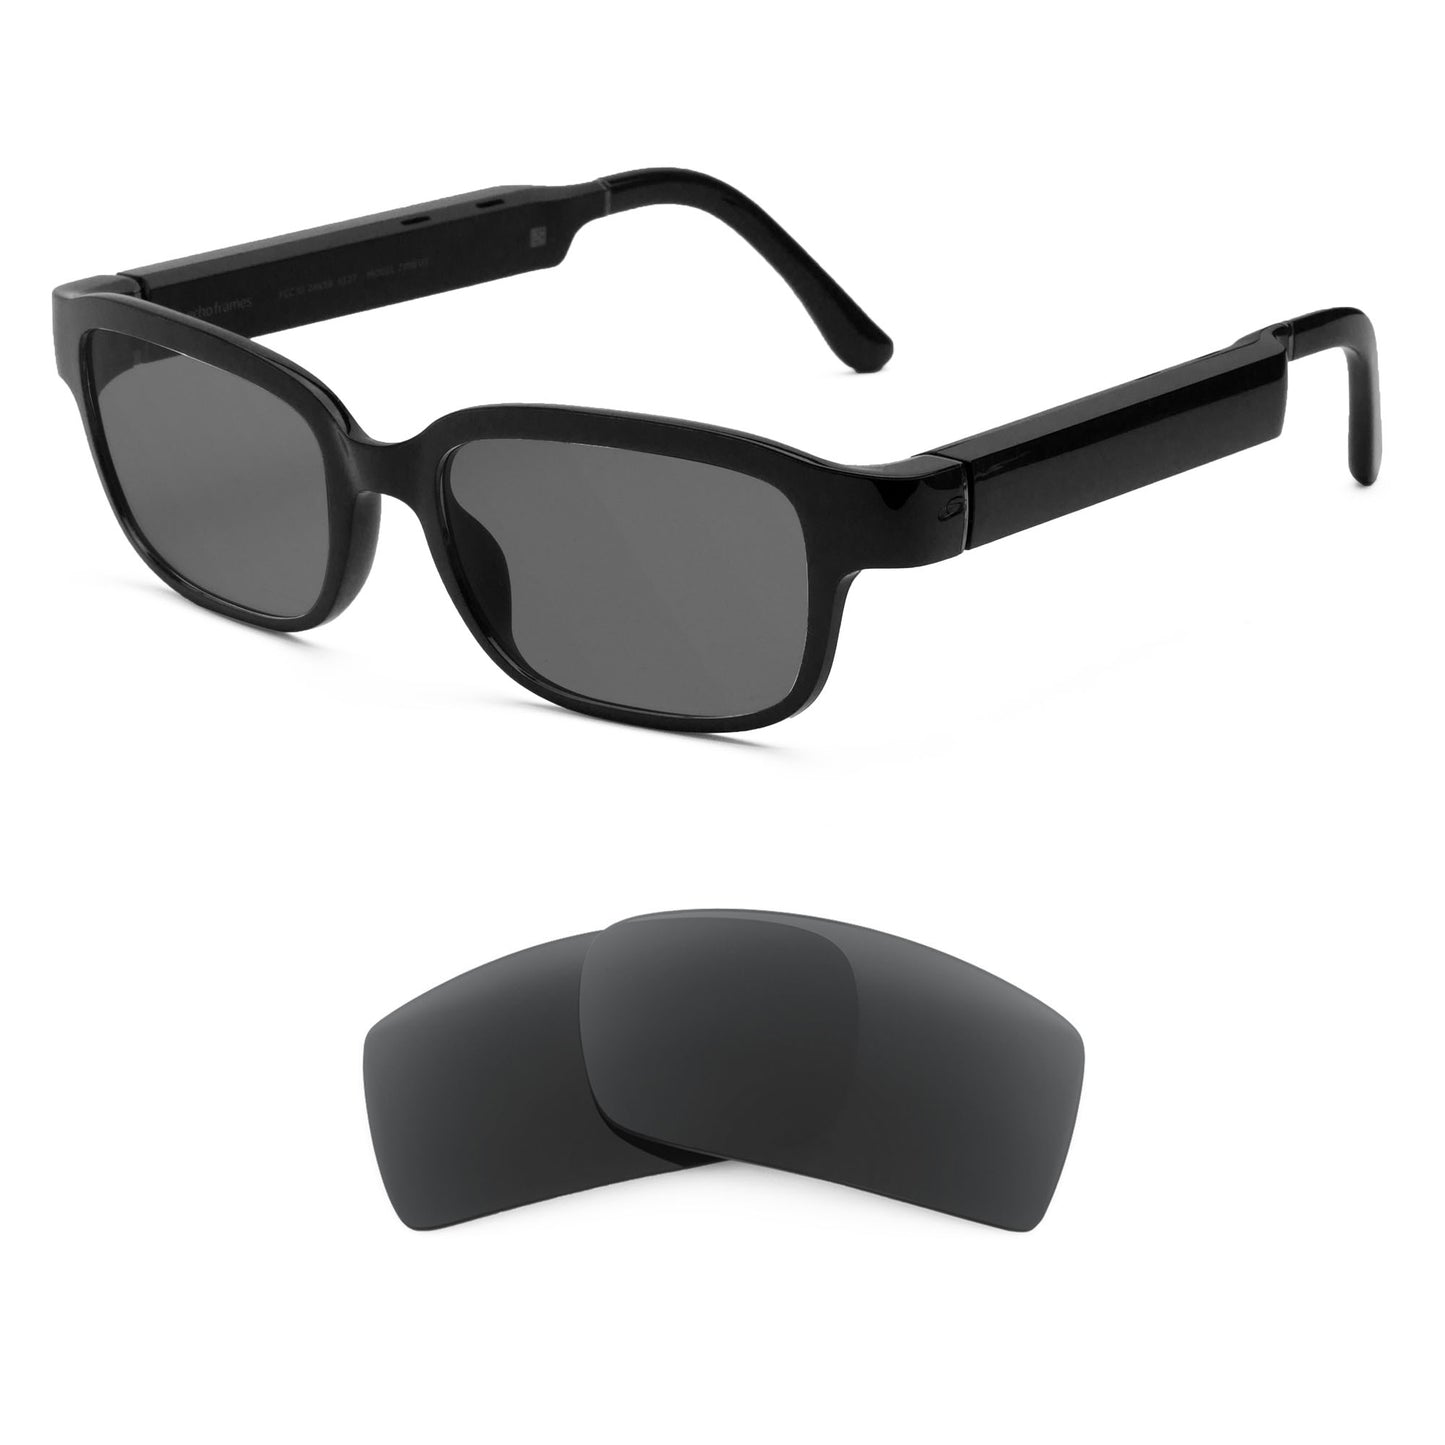 Amazon Echo Frame Gen 2 sunglasses with replacement lenses